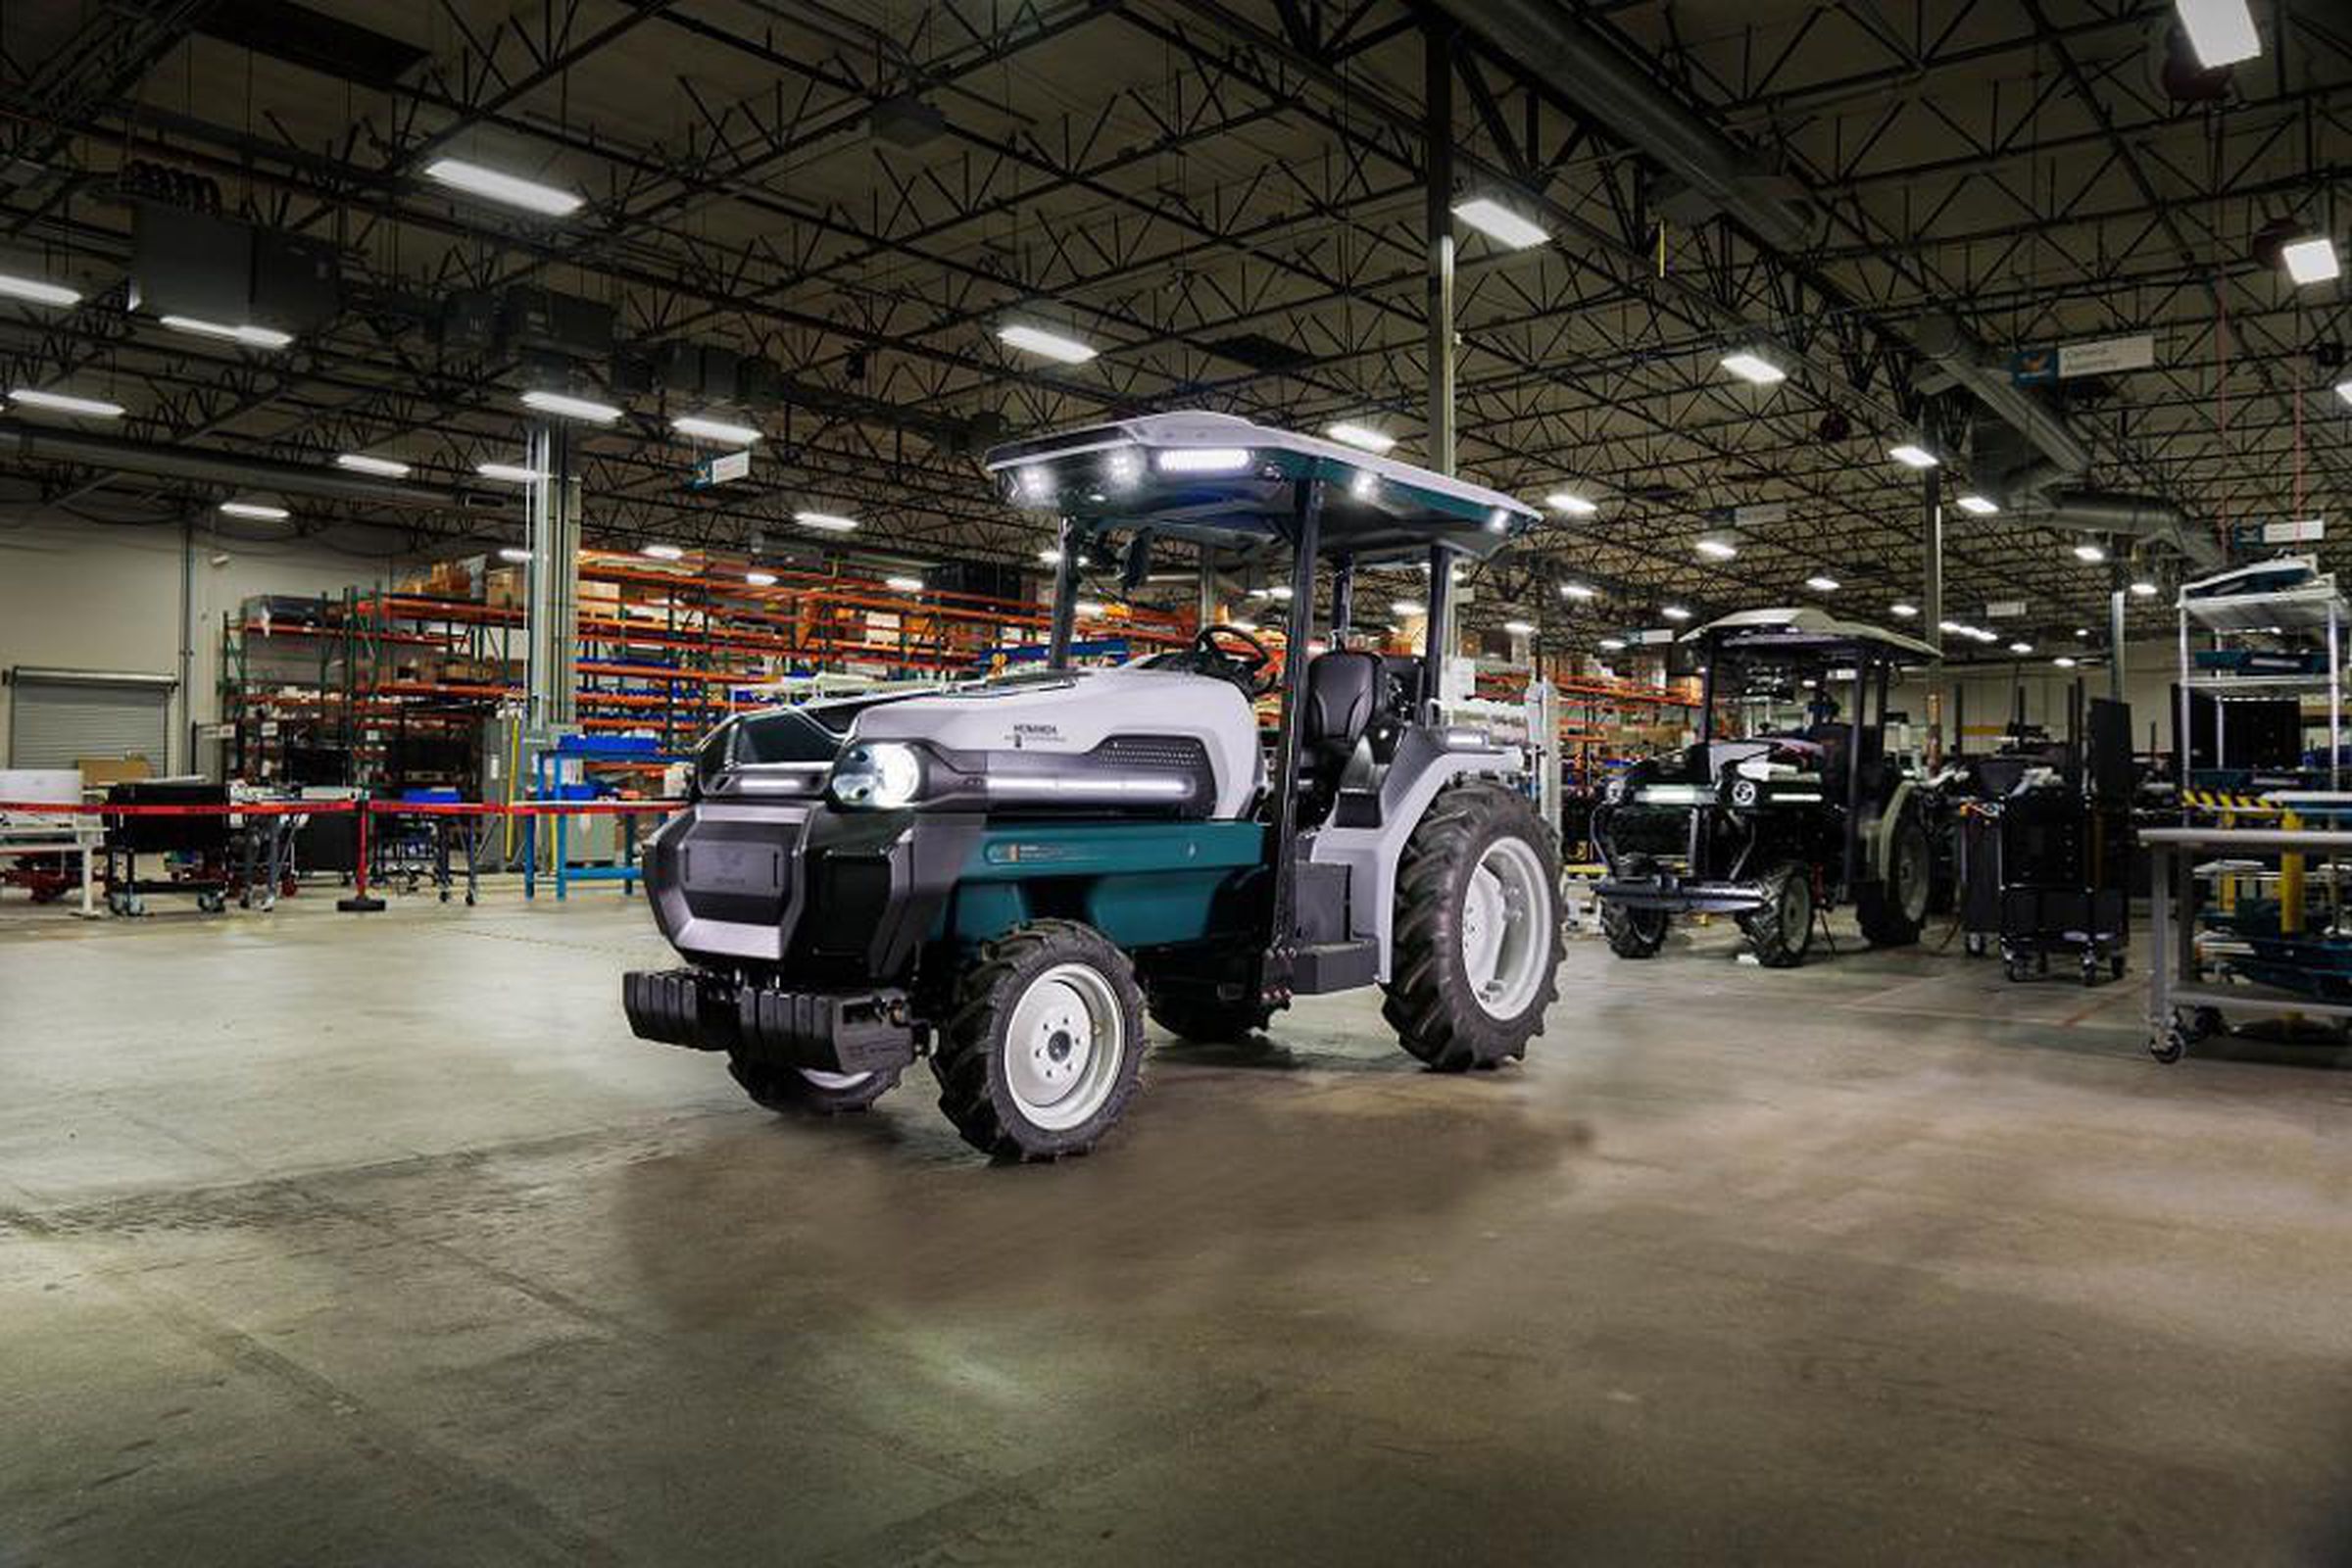 The new MK-V smart tractor is parked in the middle of a warehouse factory with a concrete floor.